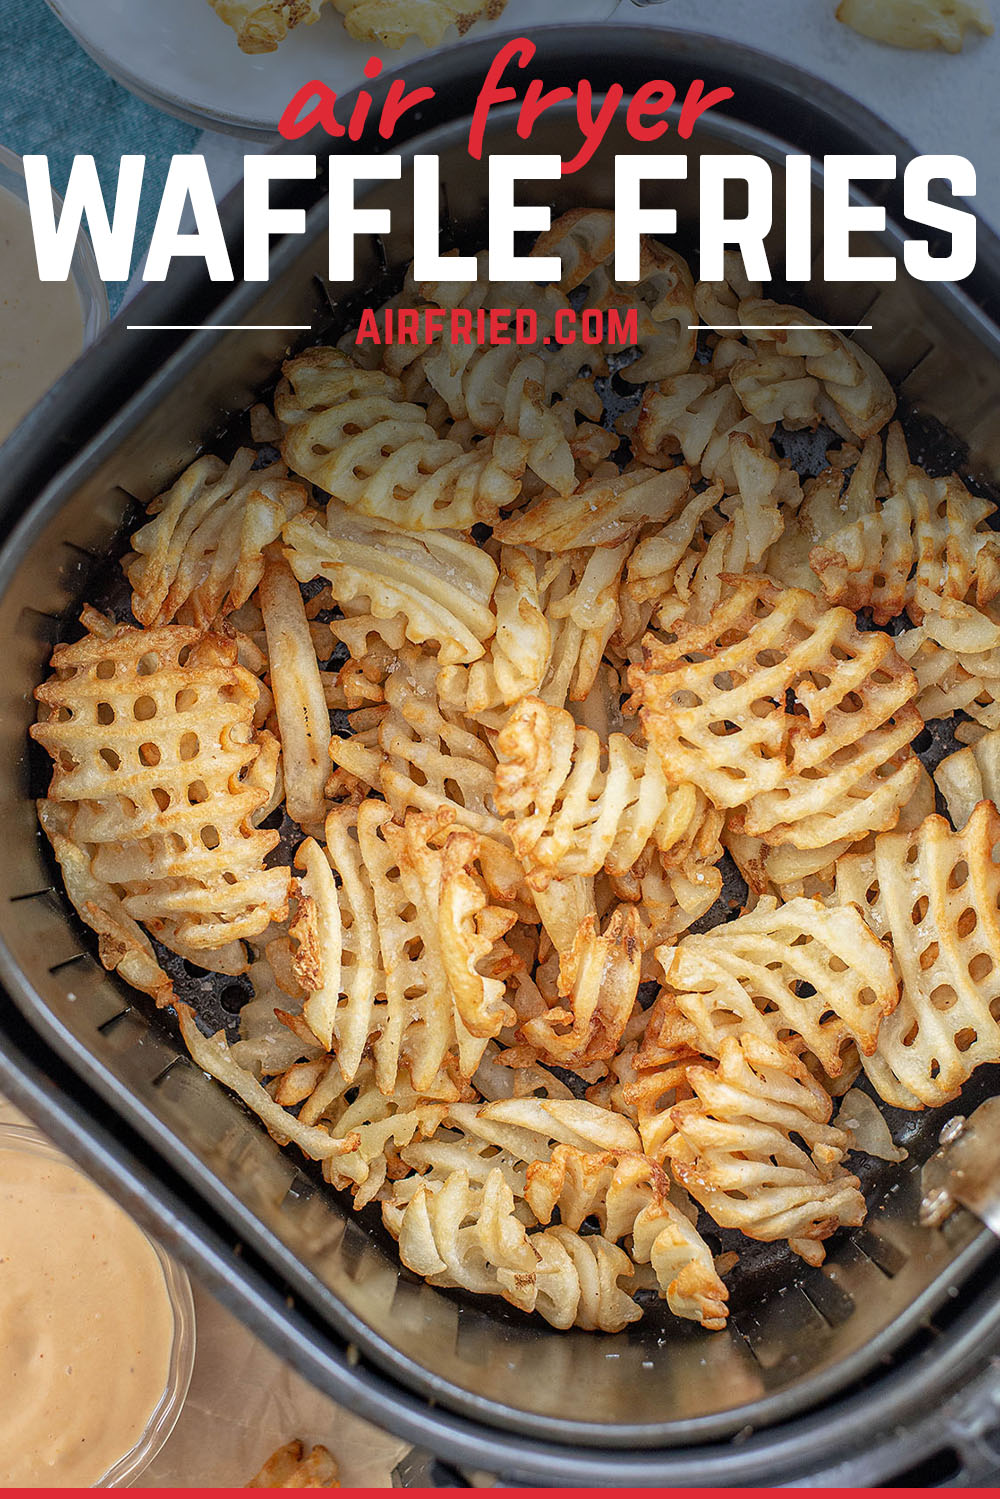 The air fryer is a great tool for cooking cirspy waffle fries!